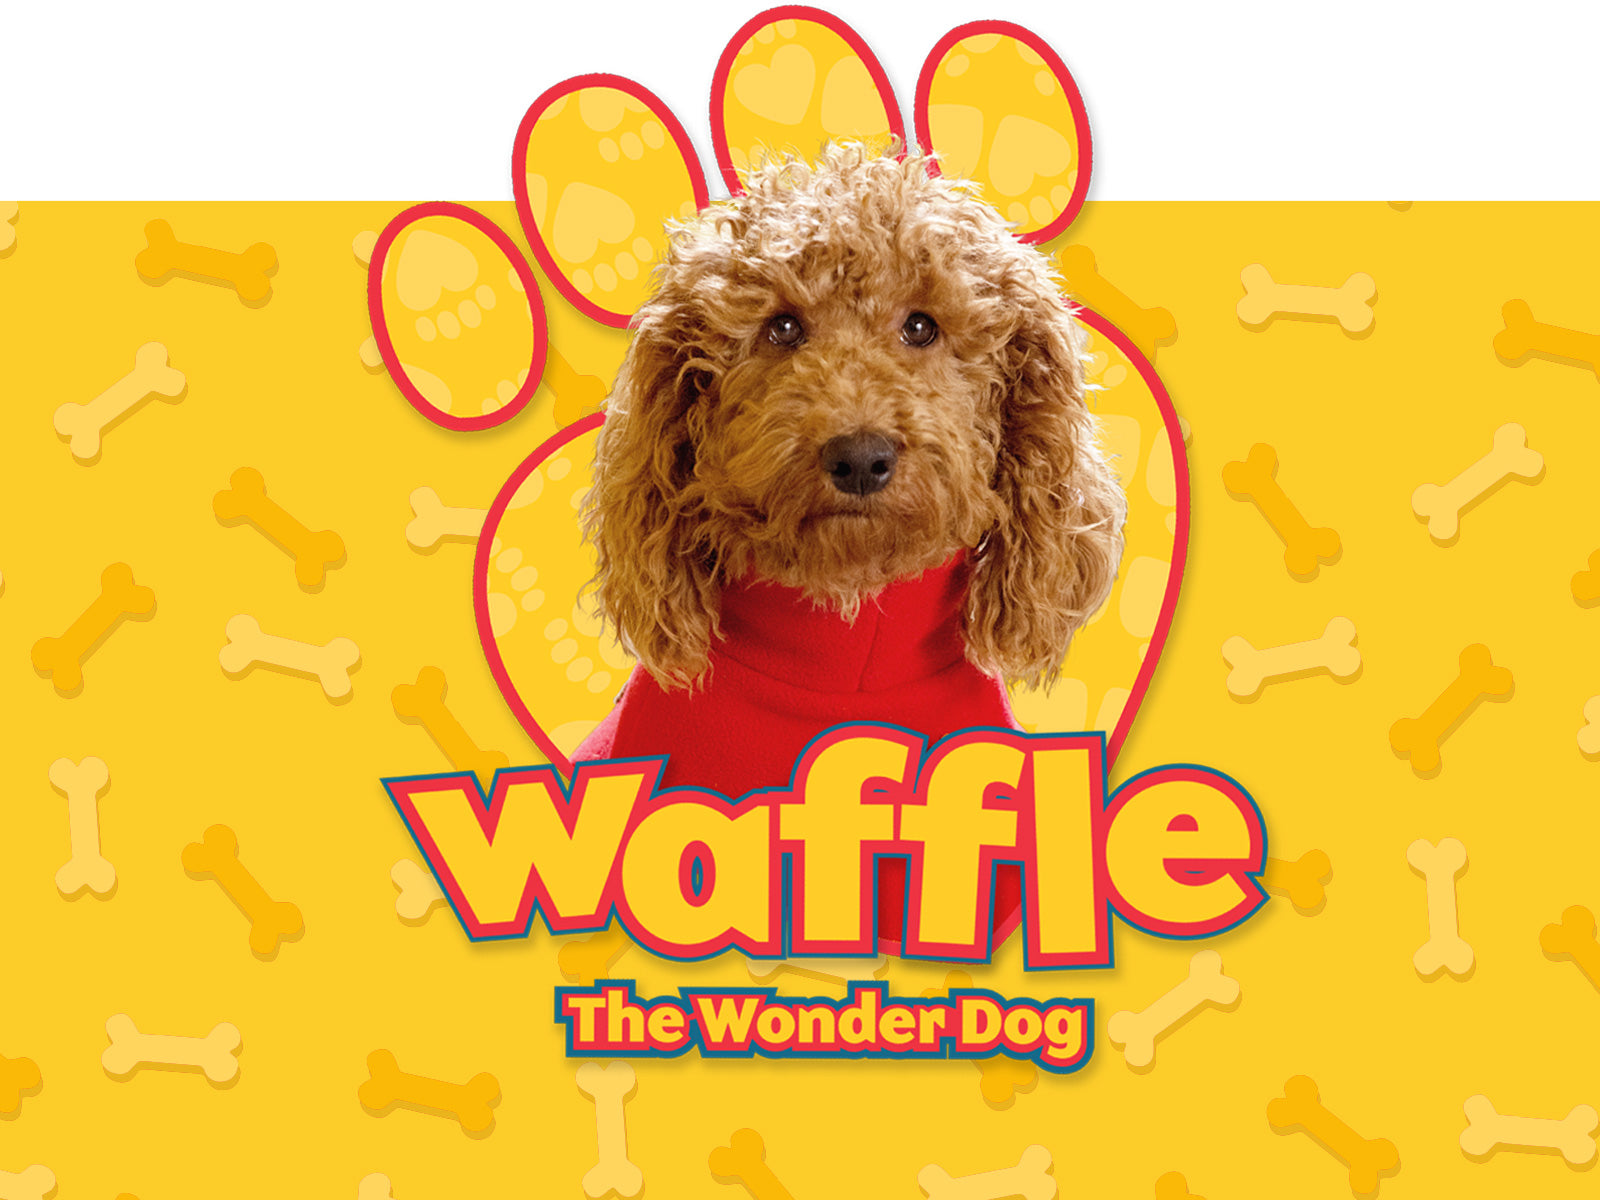 what breed of dog is waffle the wonder dog